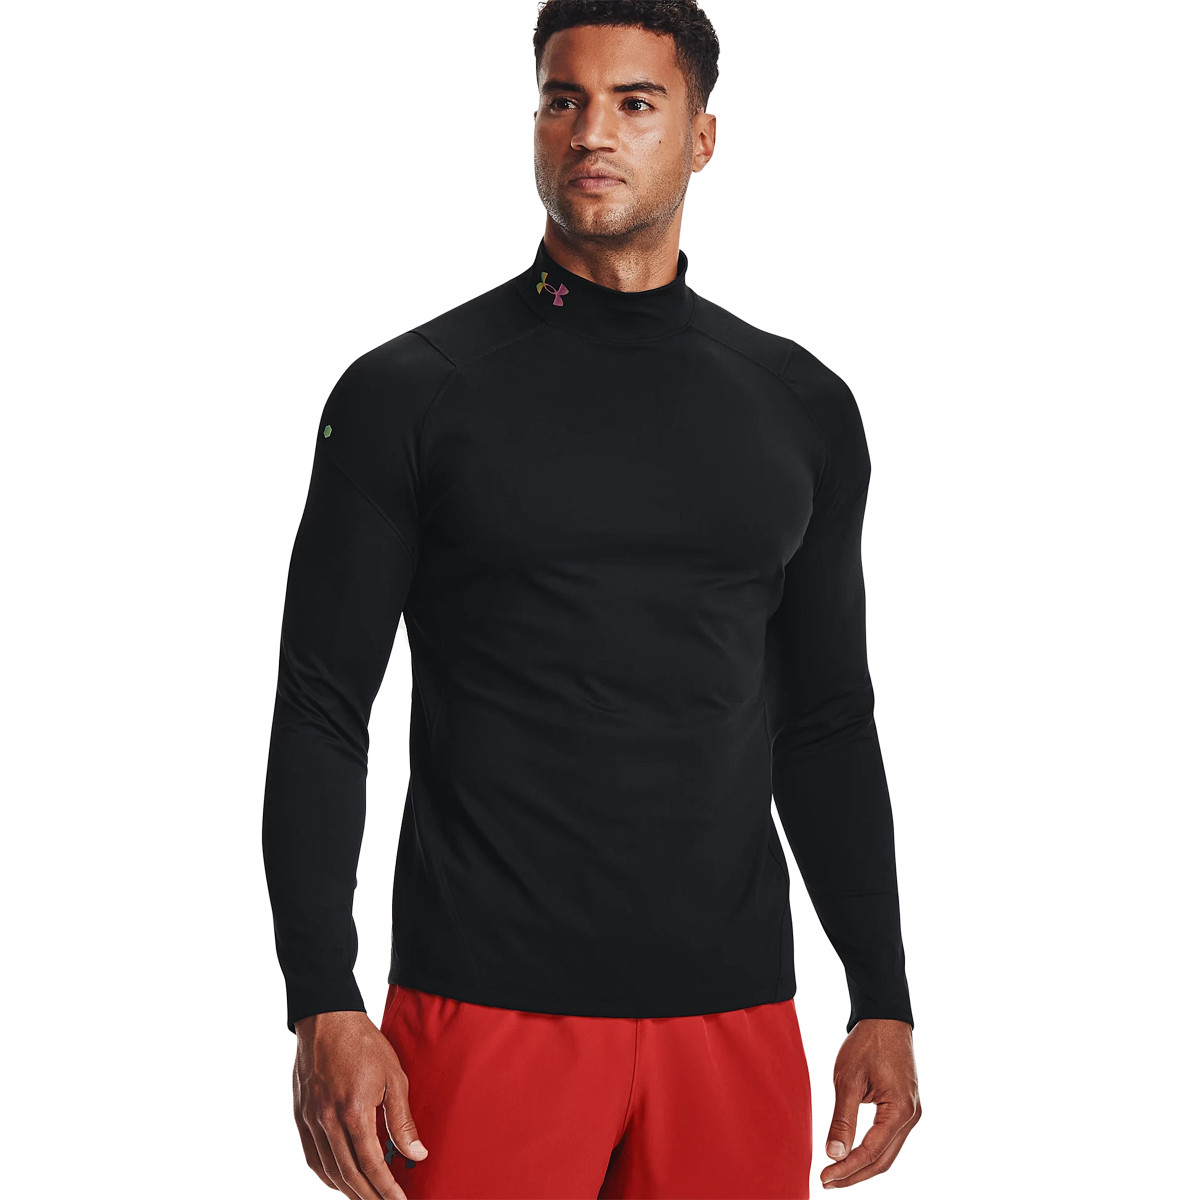 T-SHIRT UNDER ARMOUR COLD GEAR RUSH MOCK